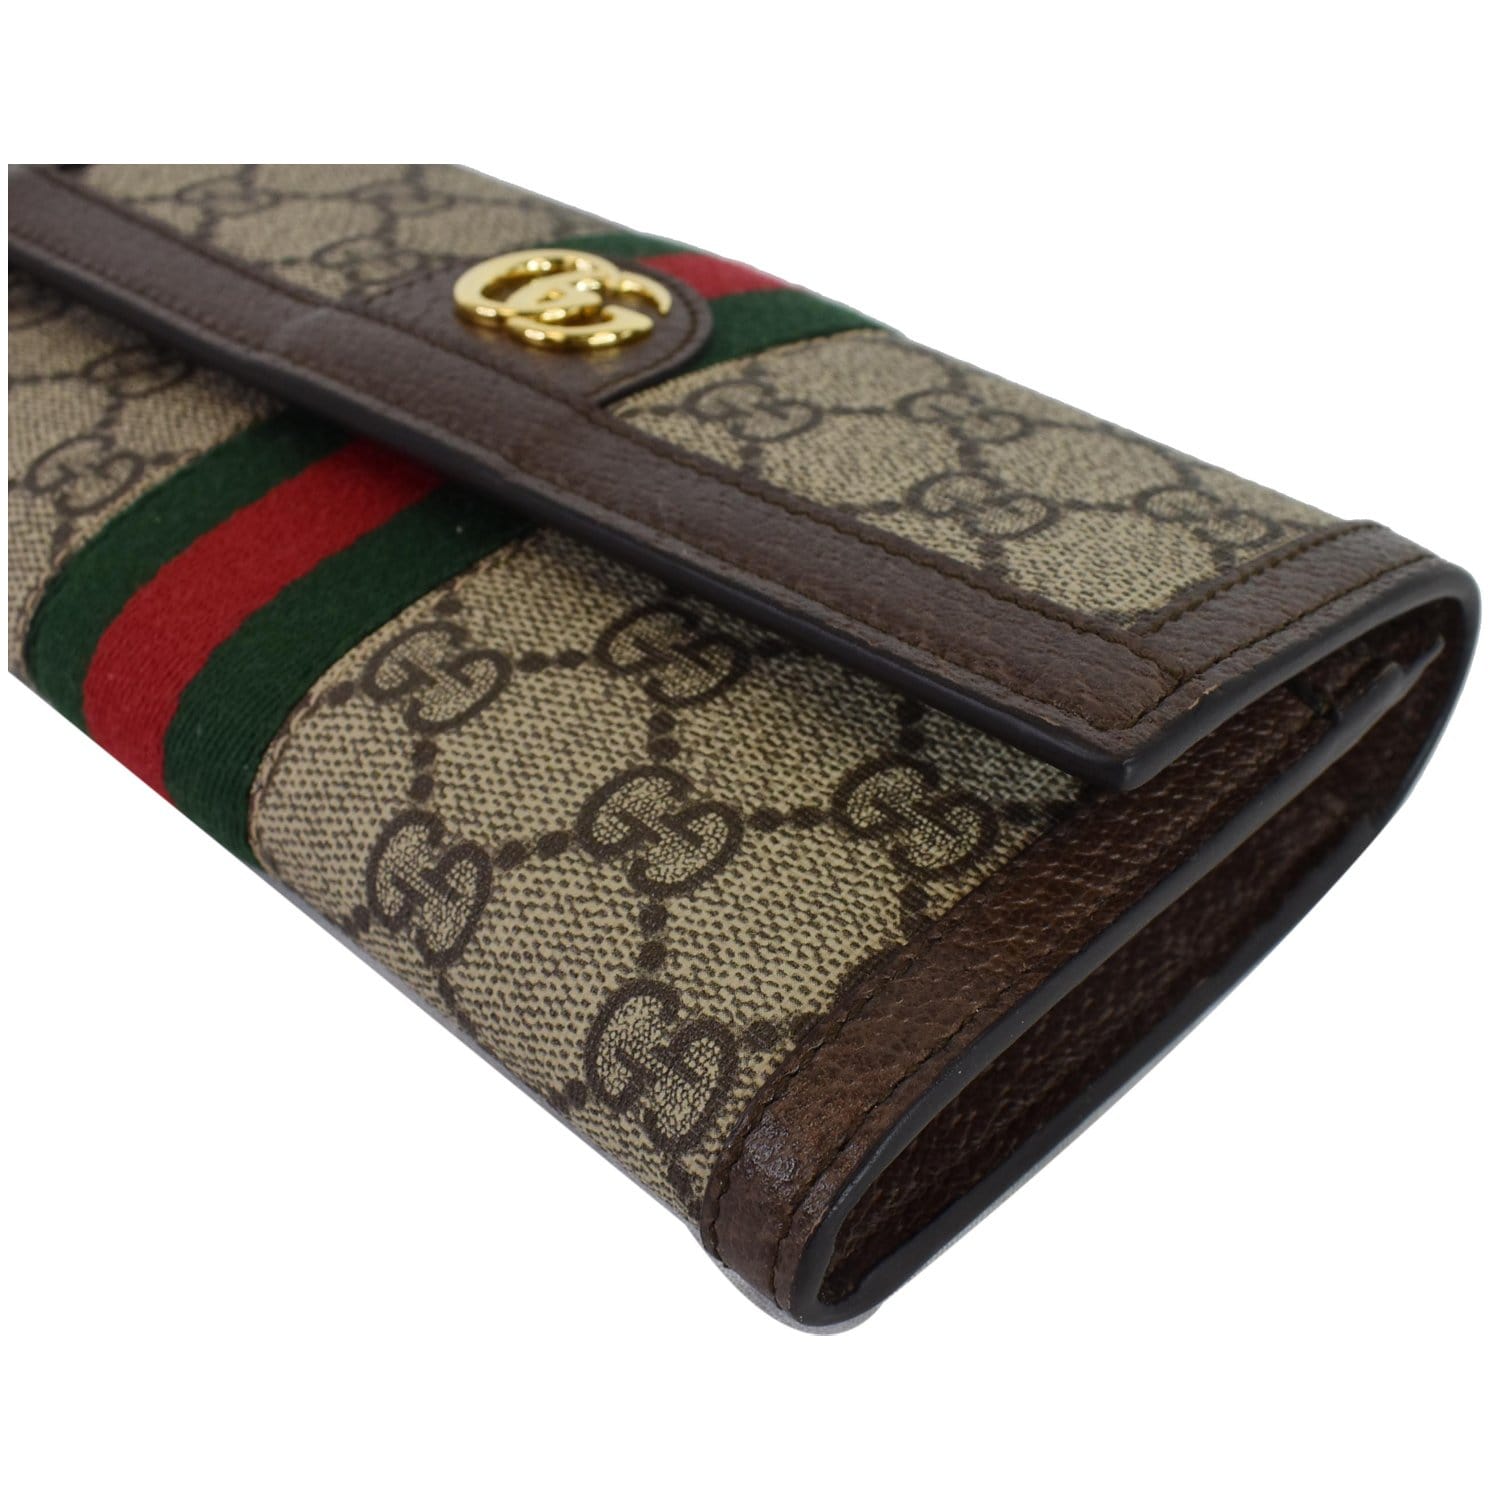 Gucci Original GG Canvas French Wallet in Beige and Emerald Green –